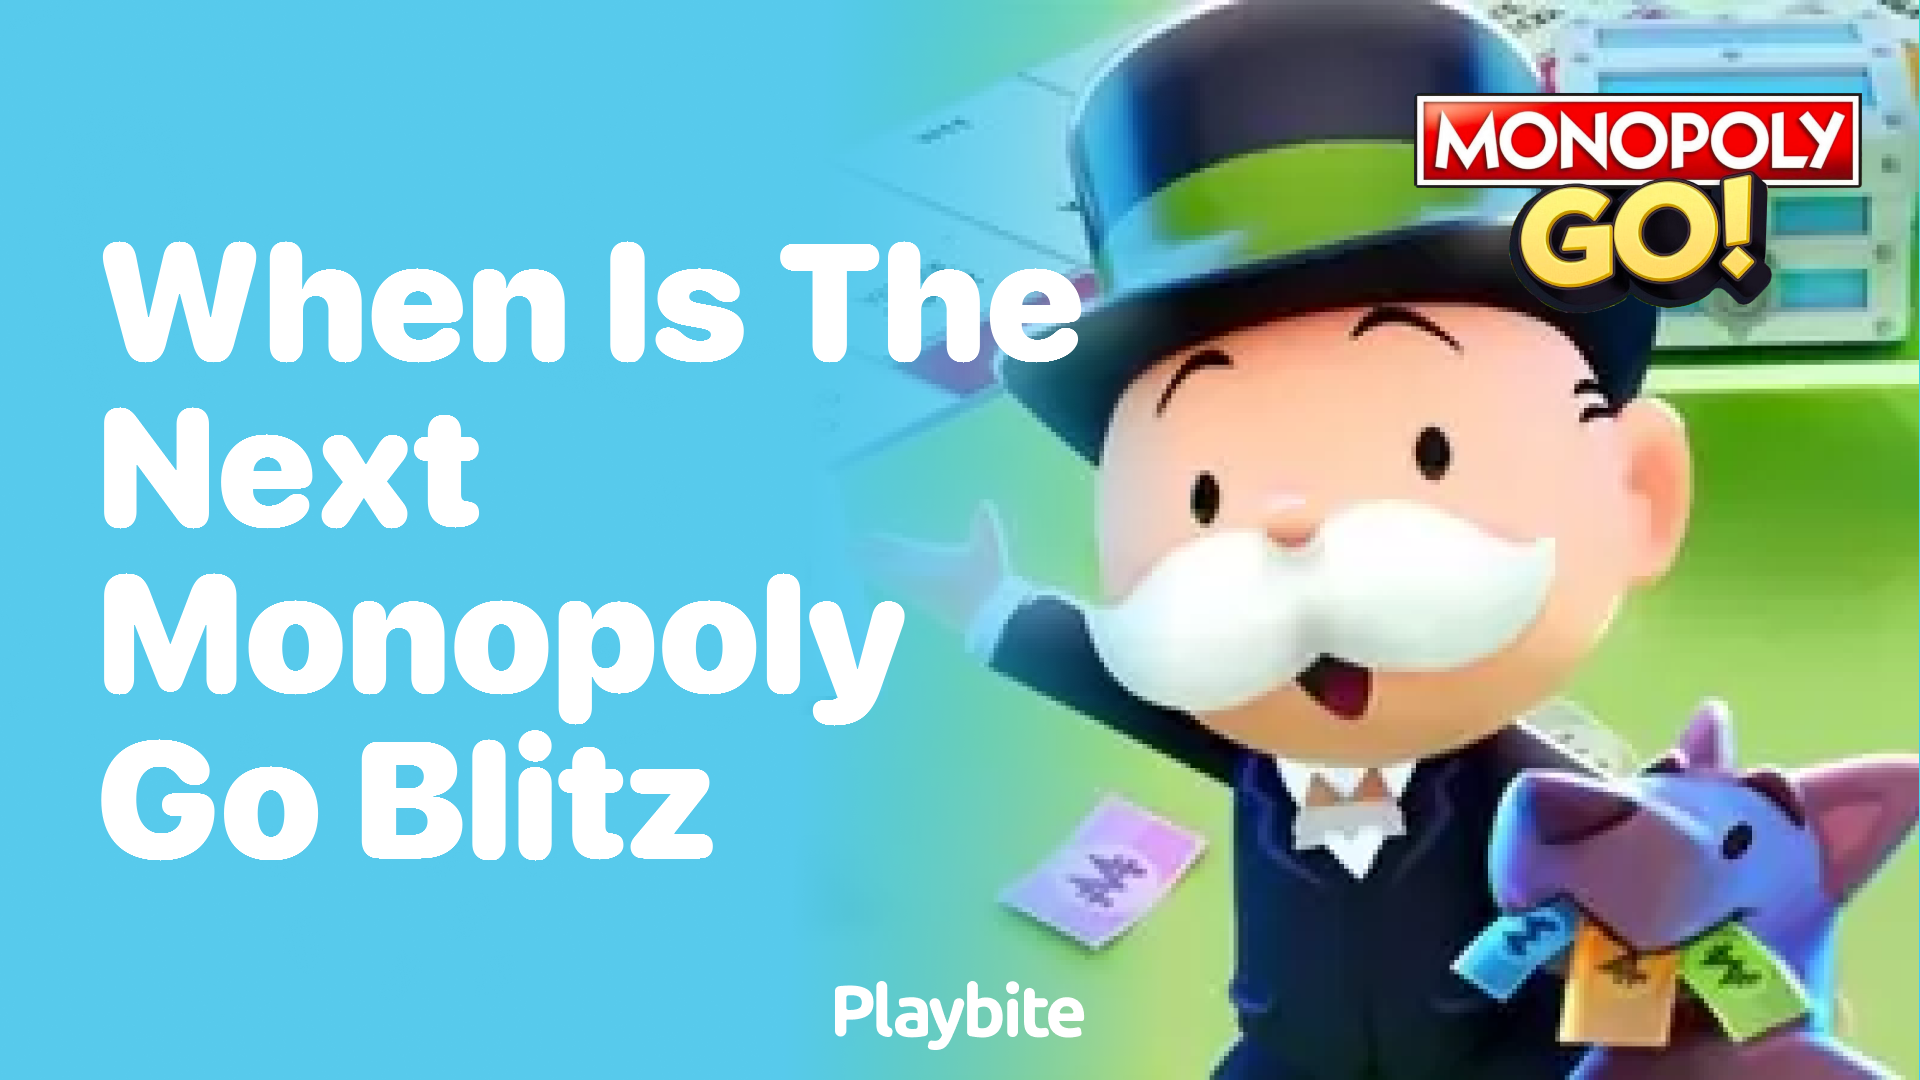 When Is the Next Monopoly Go Blitz? Find Out Here!